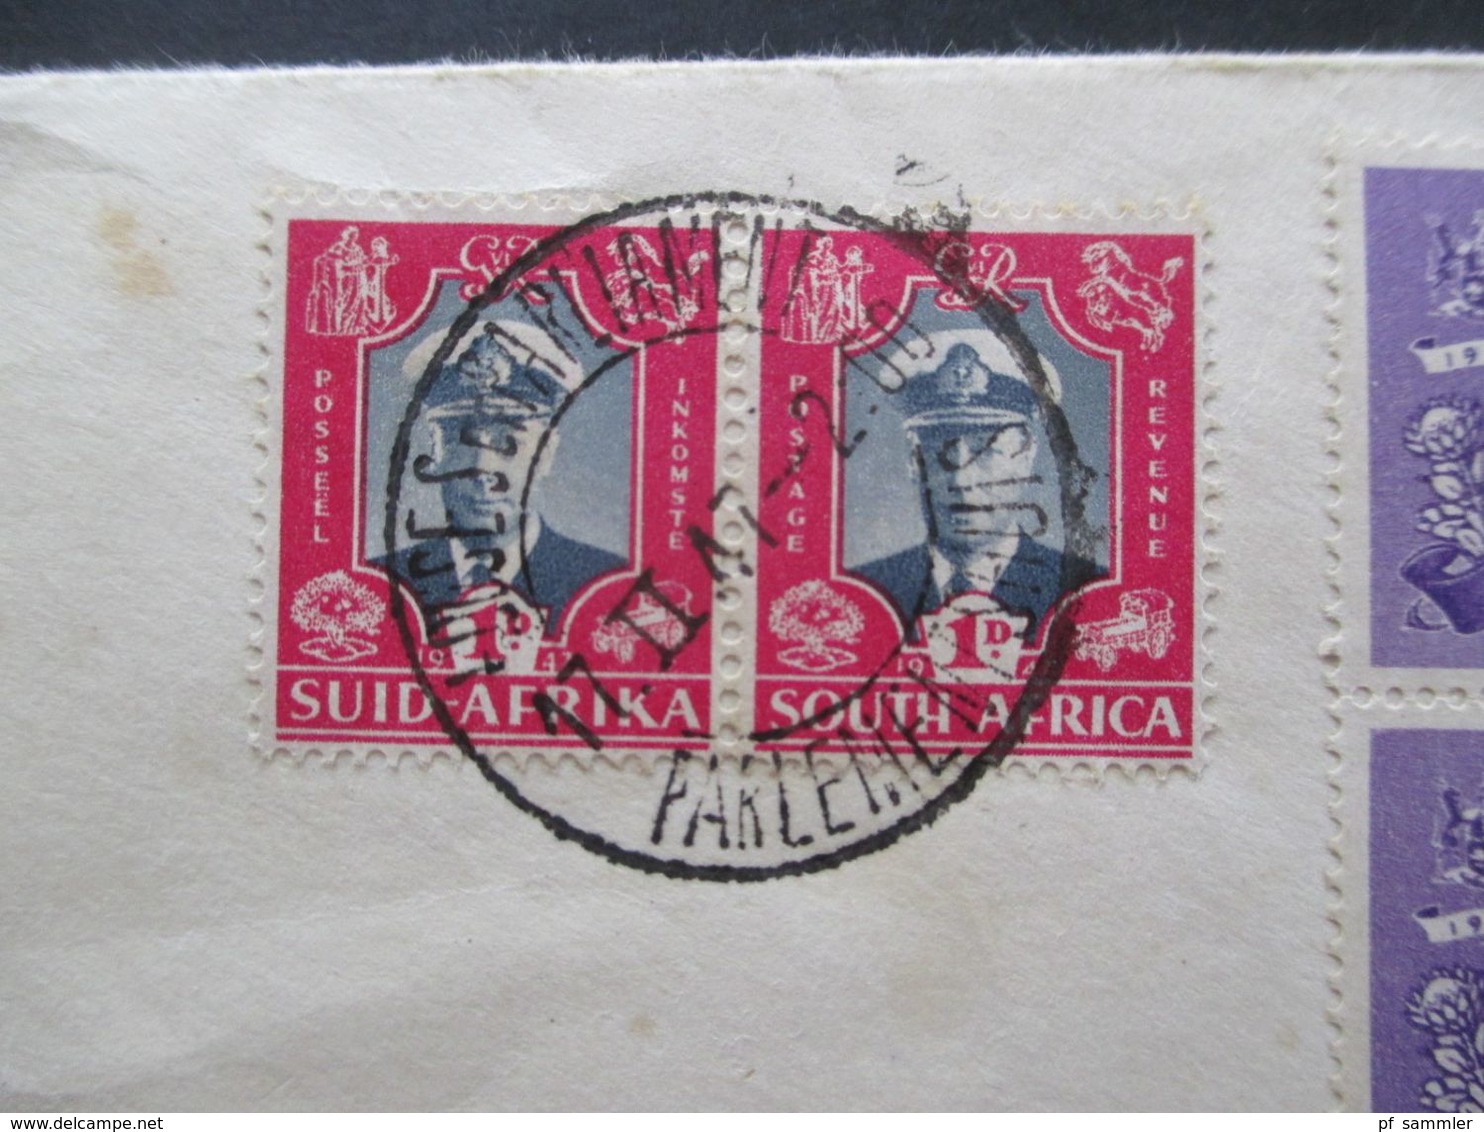 Südafrika 1947 Beleg Mit Wappen House Of Assembly Cape Town 3 Paare South Africa / Suid Africa Stempel Parliament - Covers & Documents